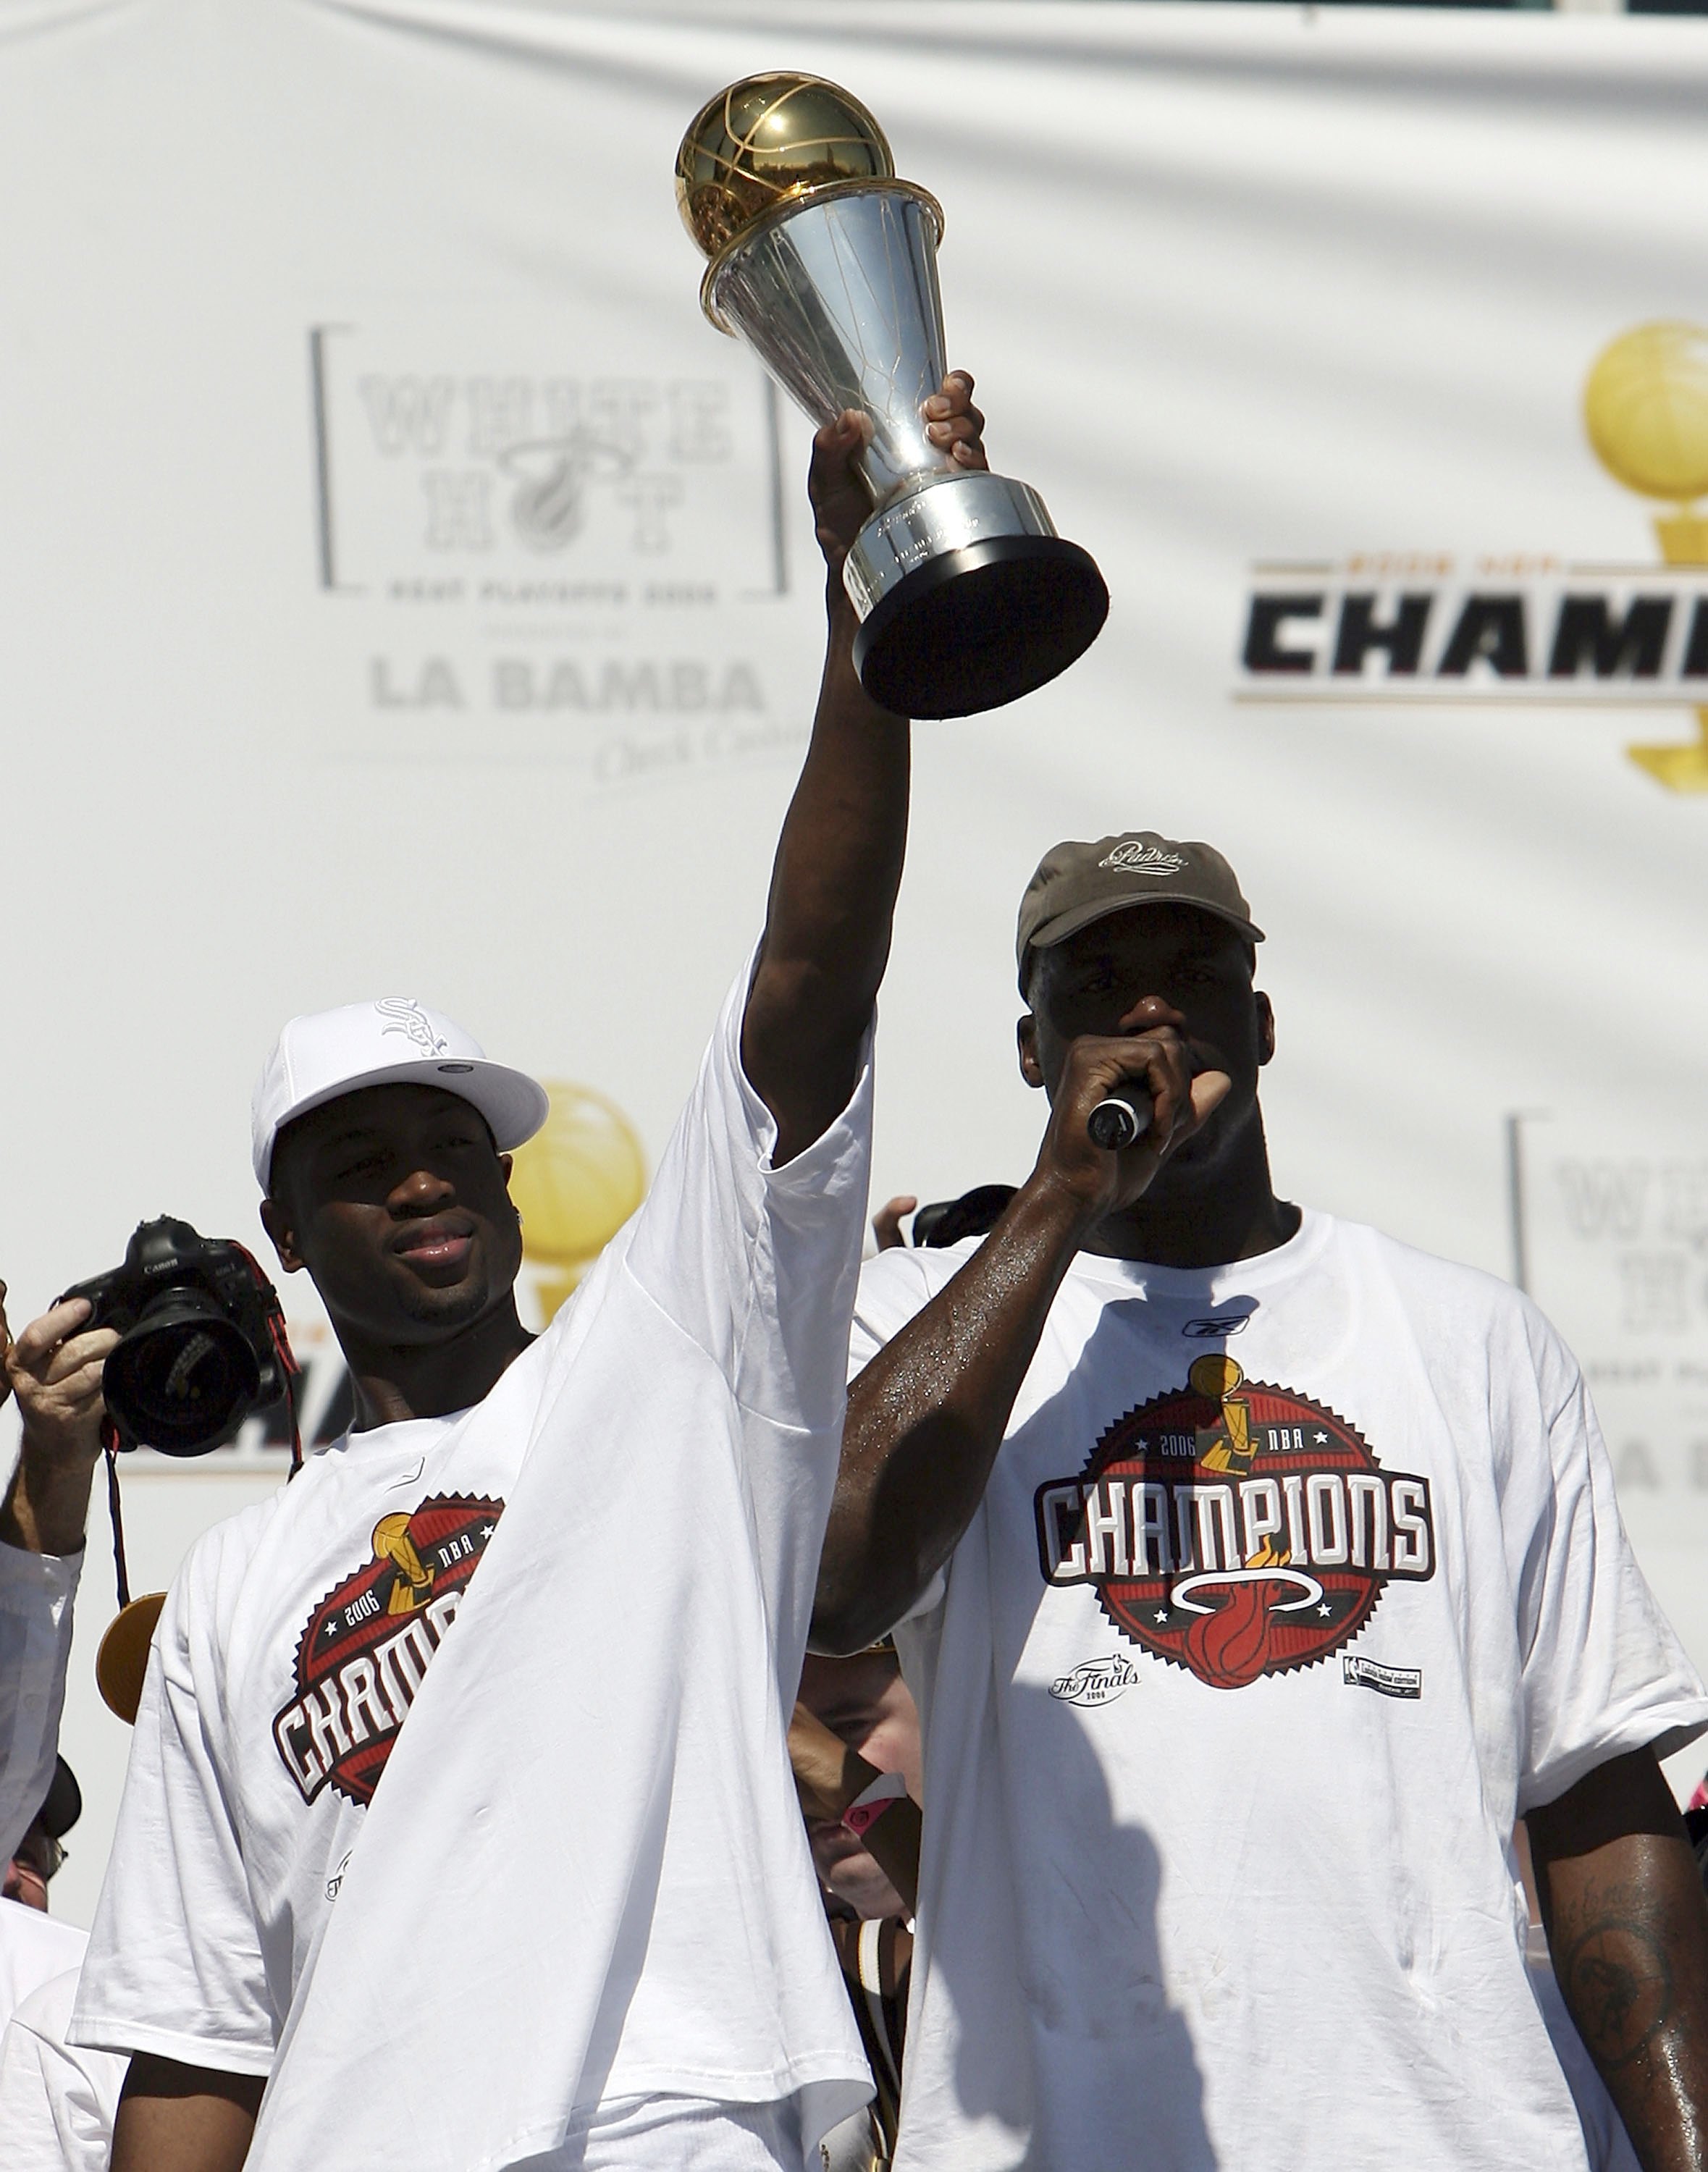 MIAMI - JUNE 23:  Shaquille O'Neal #32 (R) and Dwyane Wade #3 of the Miami Heat celebrates during the victory parade and celebration at American Airlines Arena on June 23, 2006 in Miami, Florida. NOTE TO USER: User expressly acknowledges and agrees that, 